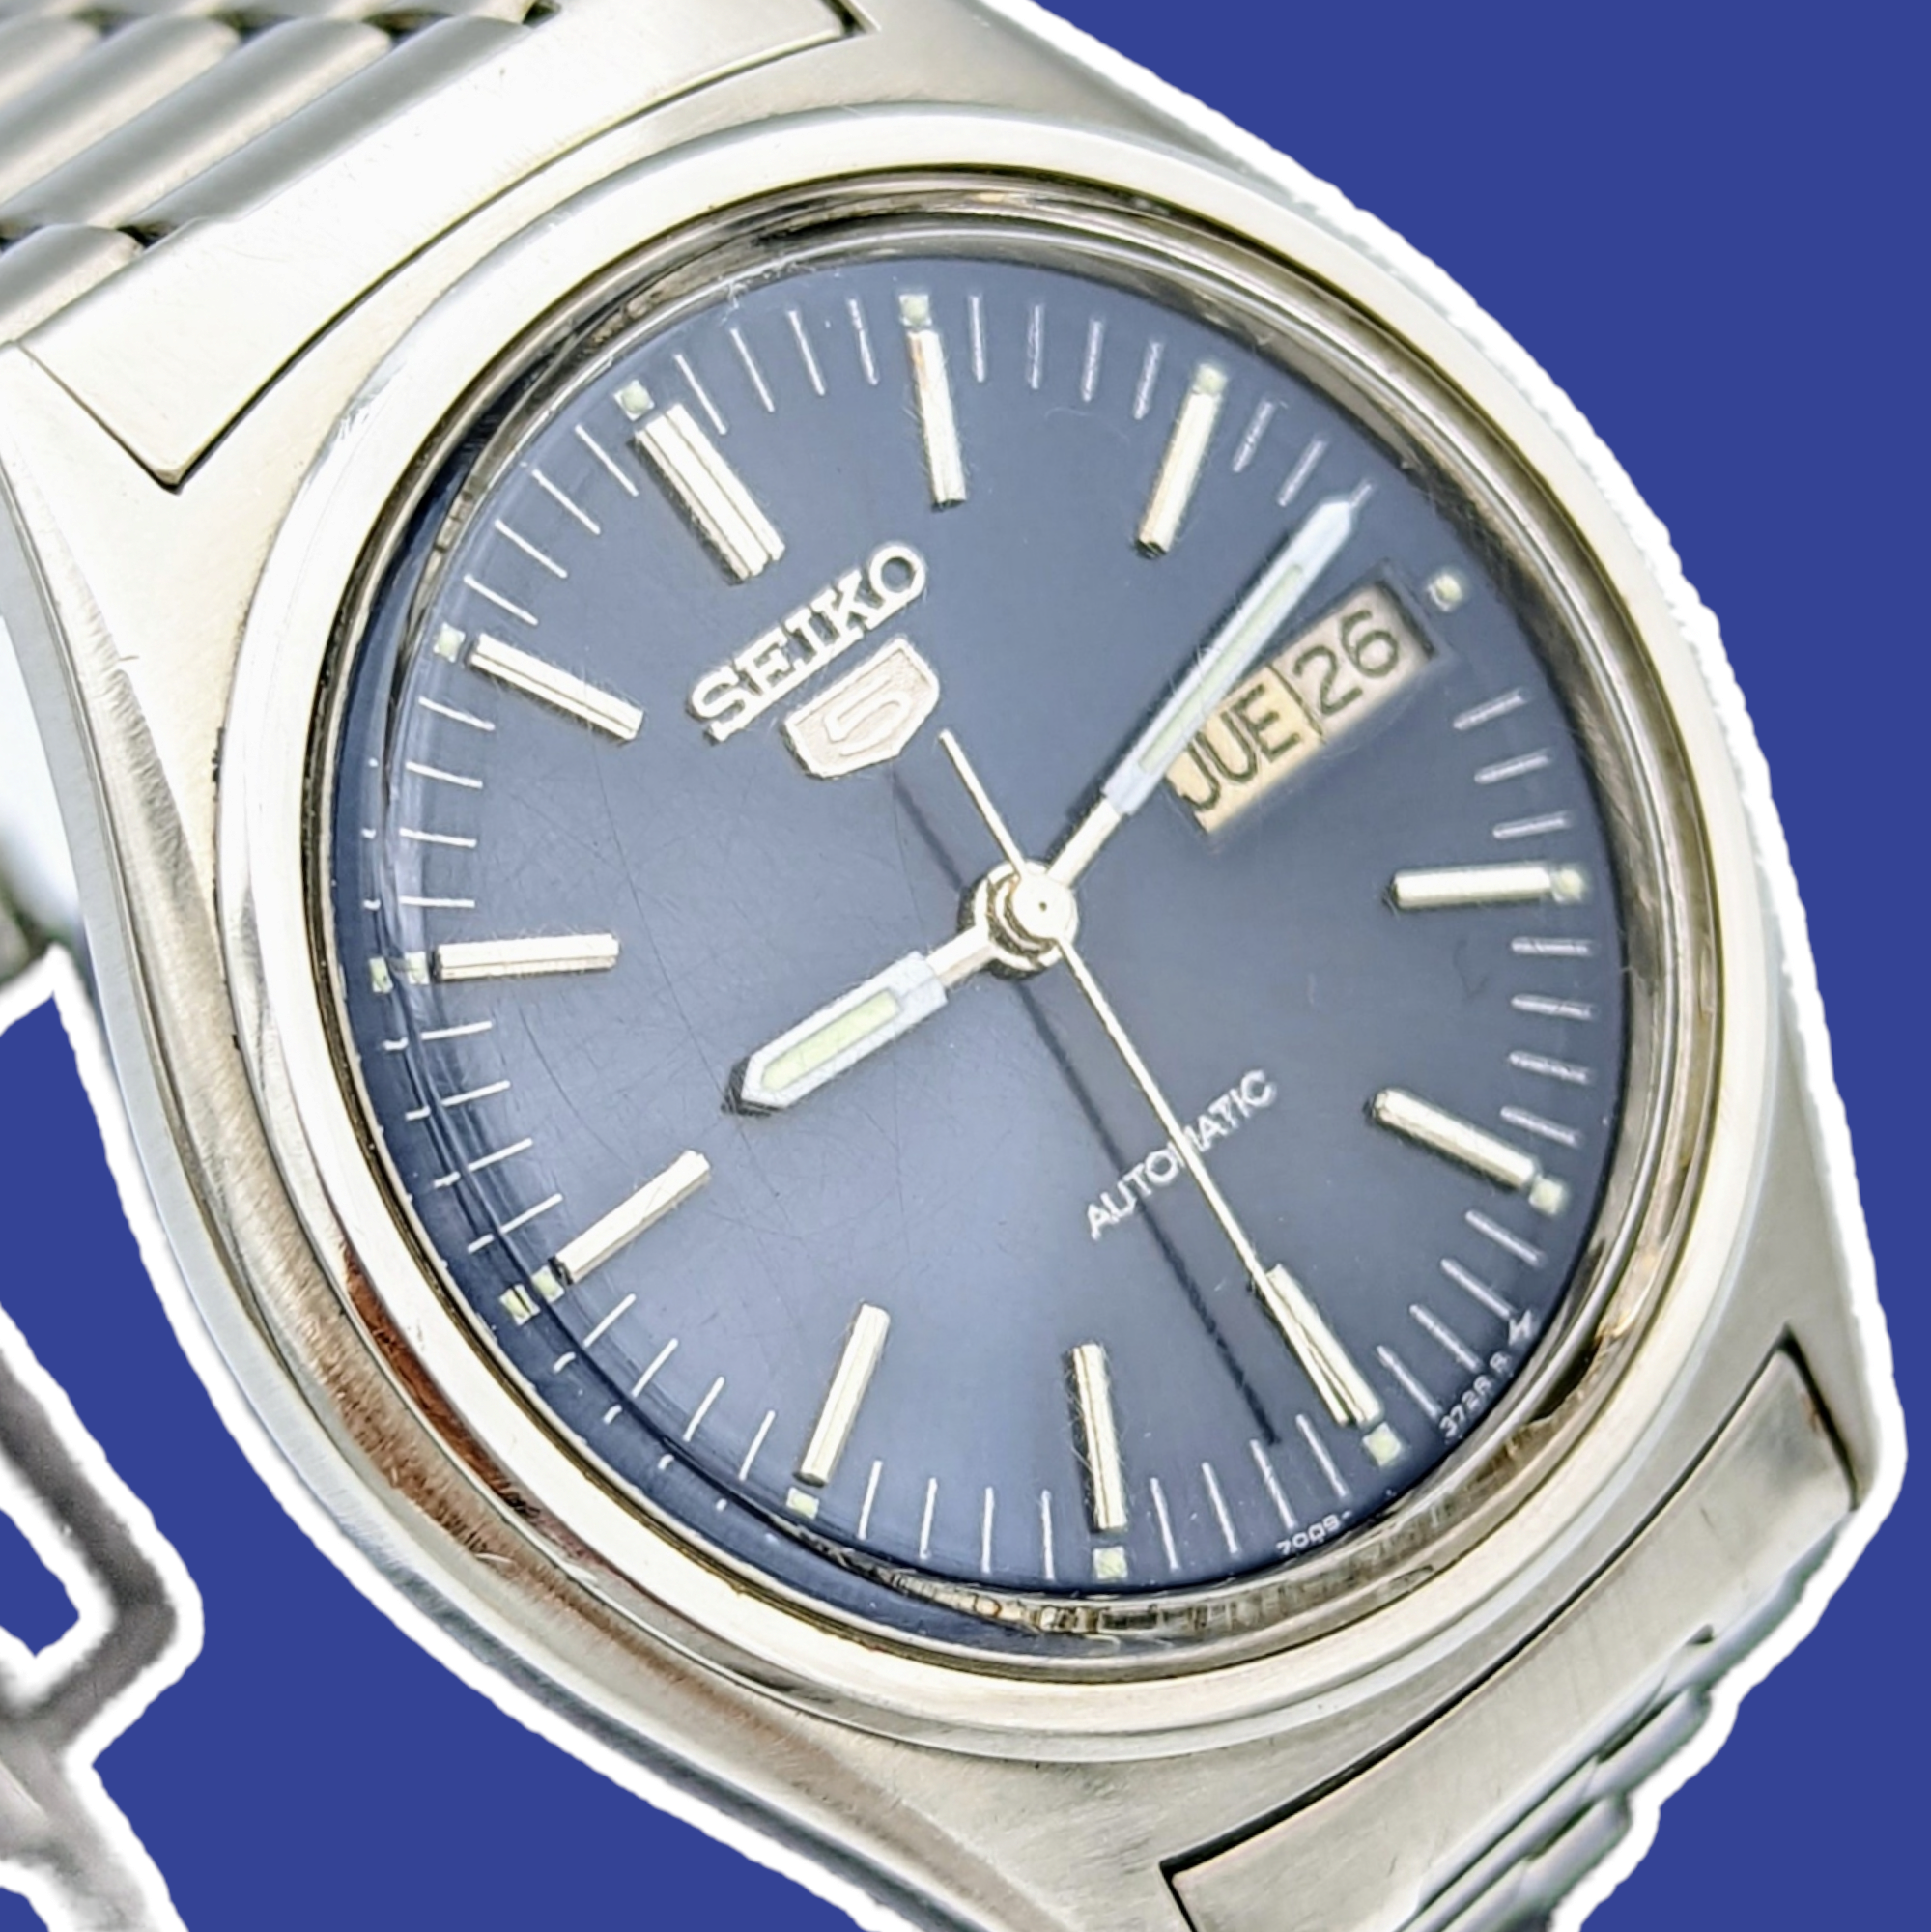 1985 SEIKO 5 Automatic Watch Day/Date Indicator – SECOND HAND HOROLOGY